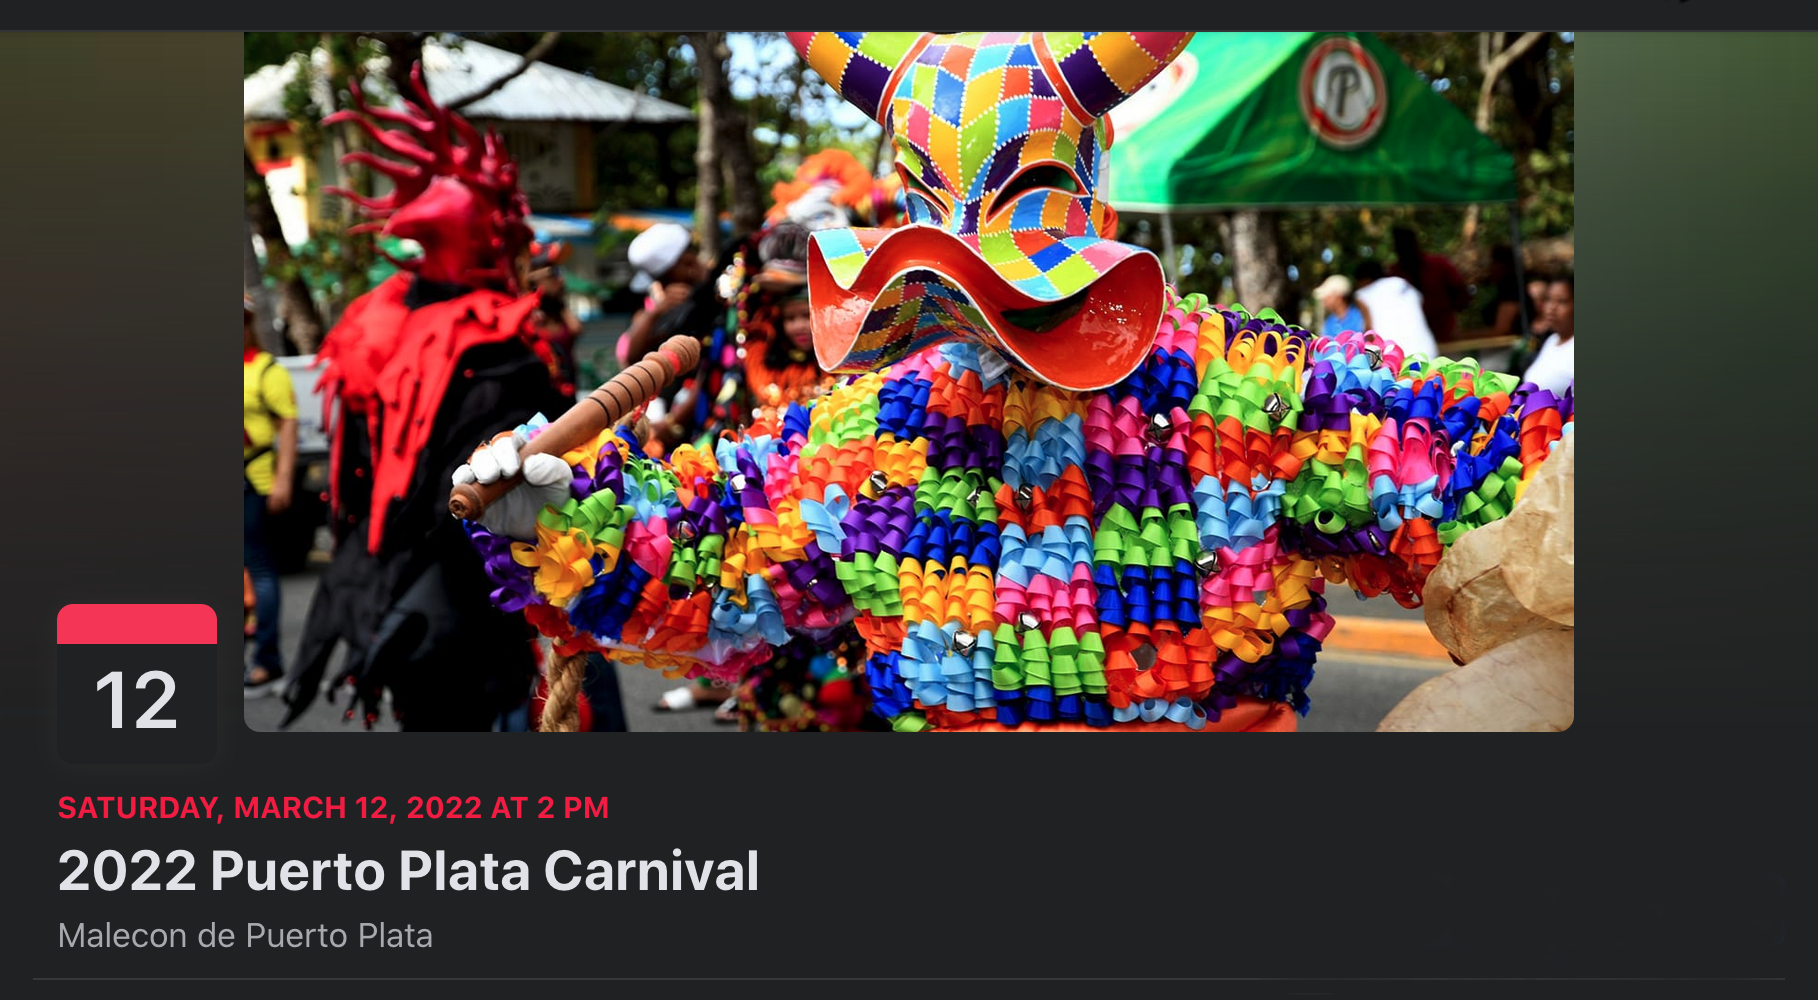 Facebook event poster for Puerto Plata carnival 2022